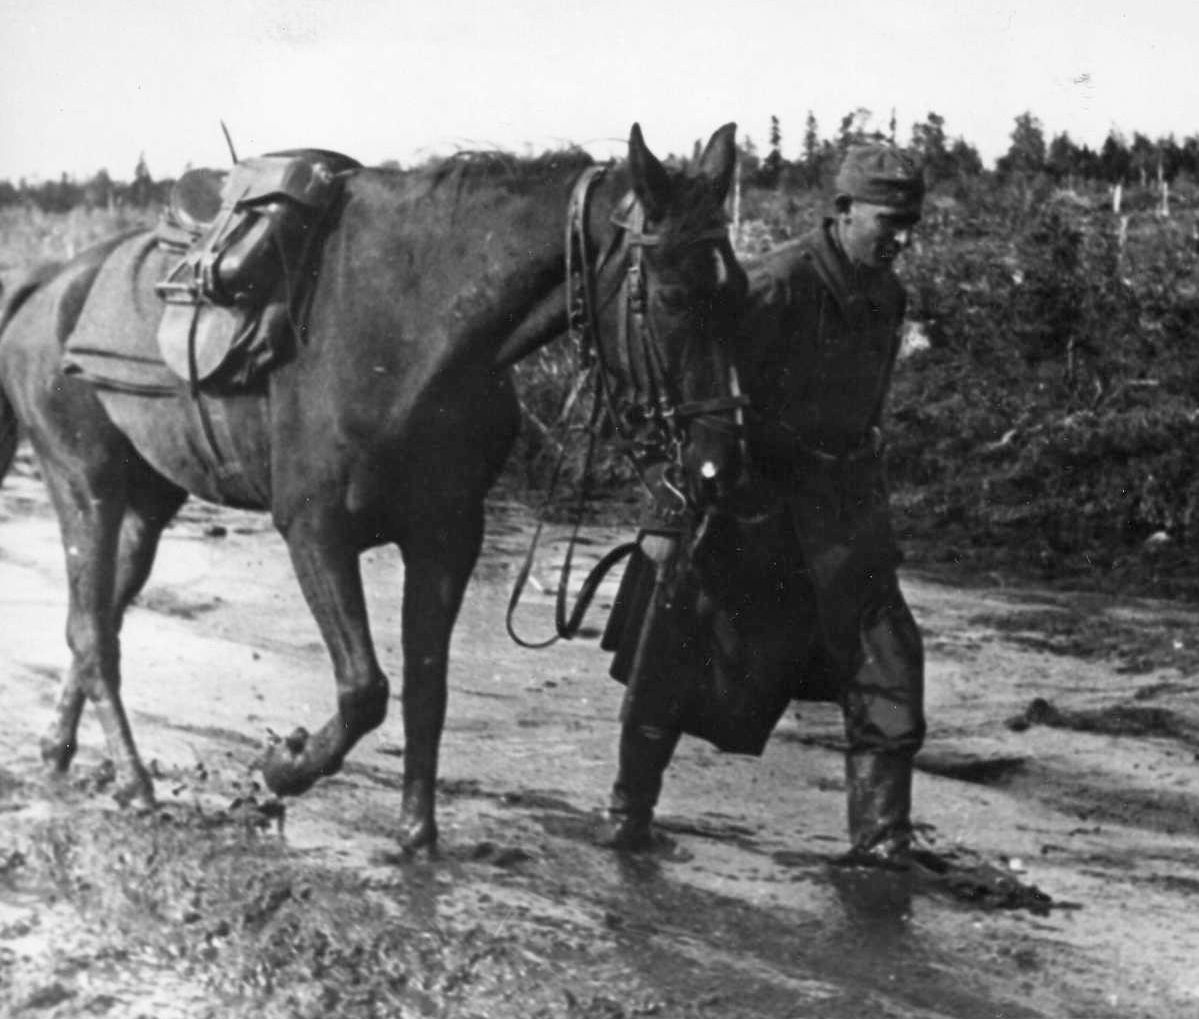 Slogging through mud on the Eastern Front, a German soldier leads his horse forward. Both men and horses were pushed seemingly beyond the limits of endurance during the brutal fighting between the Wehrmacht and the Red Army.